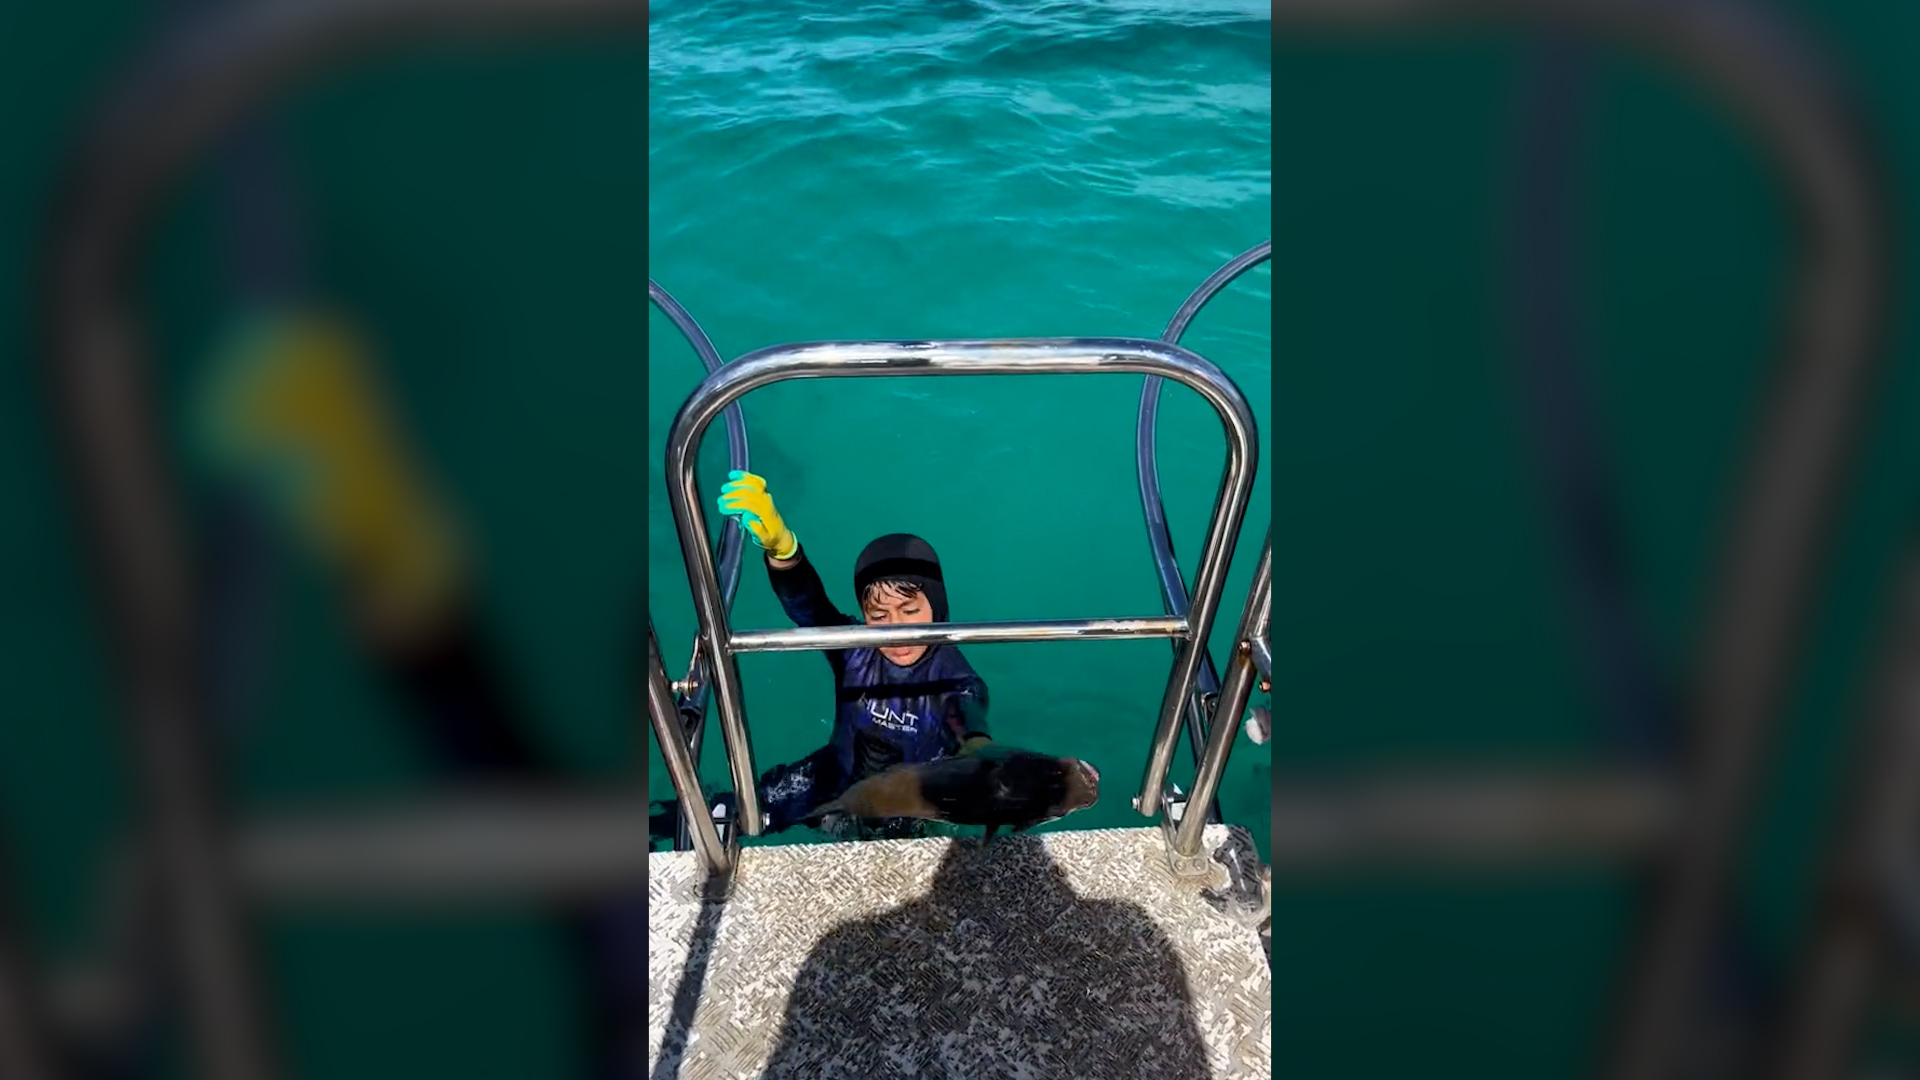 The boy was showing the camera his fishing when he was attacked by the animal